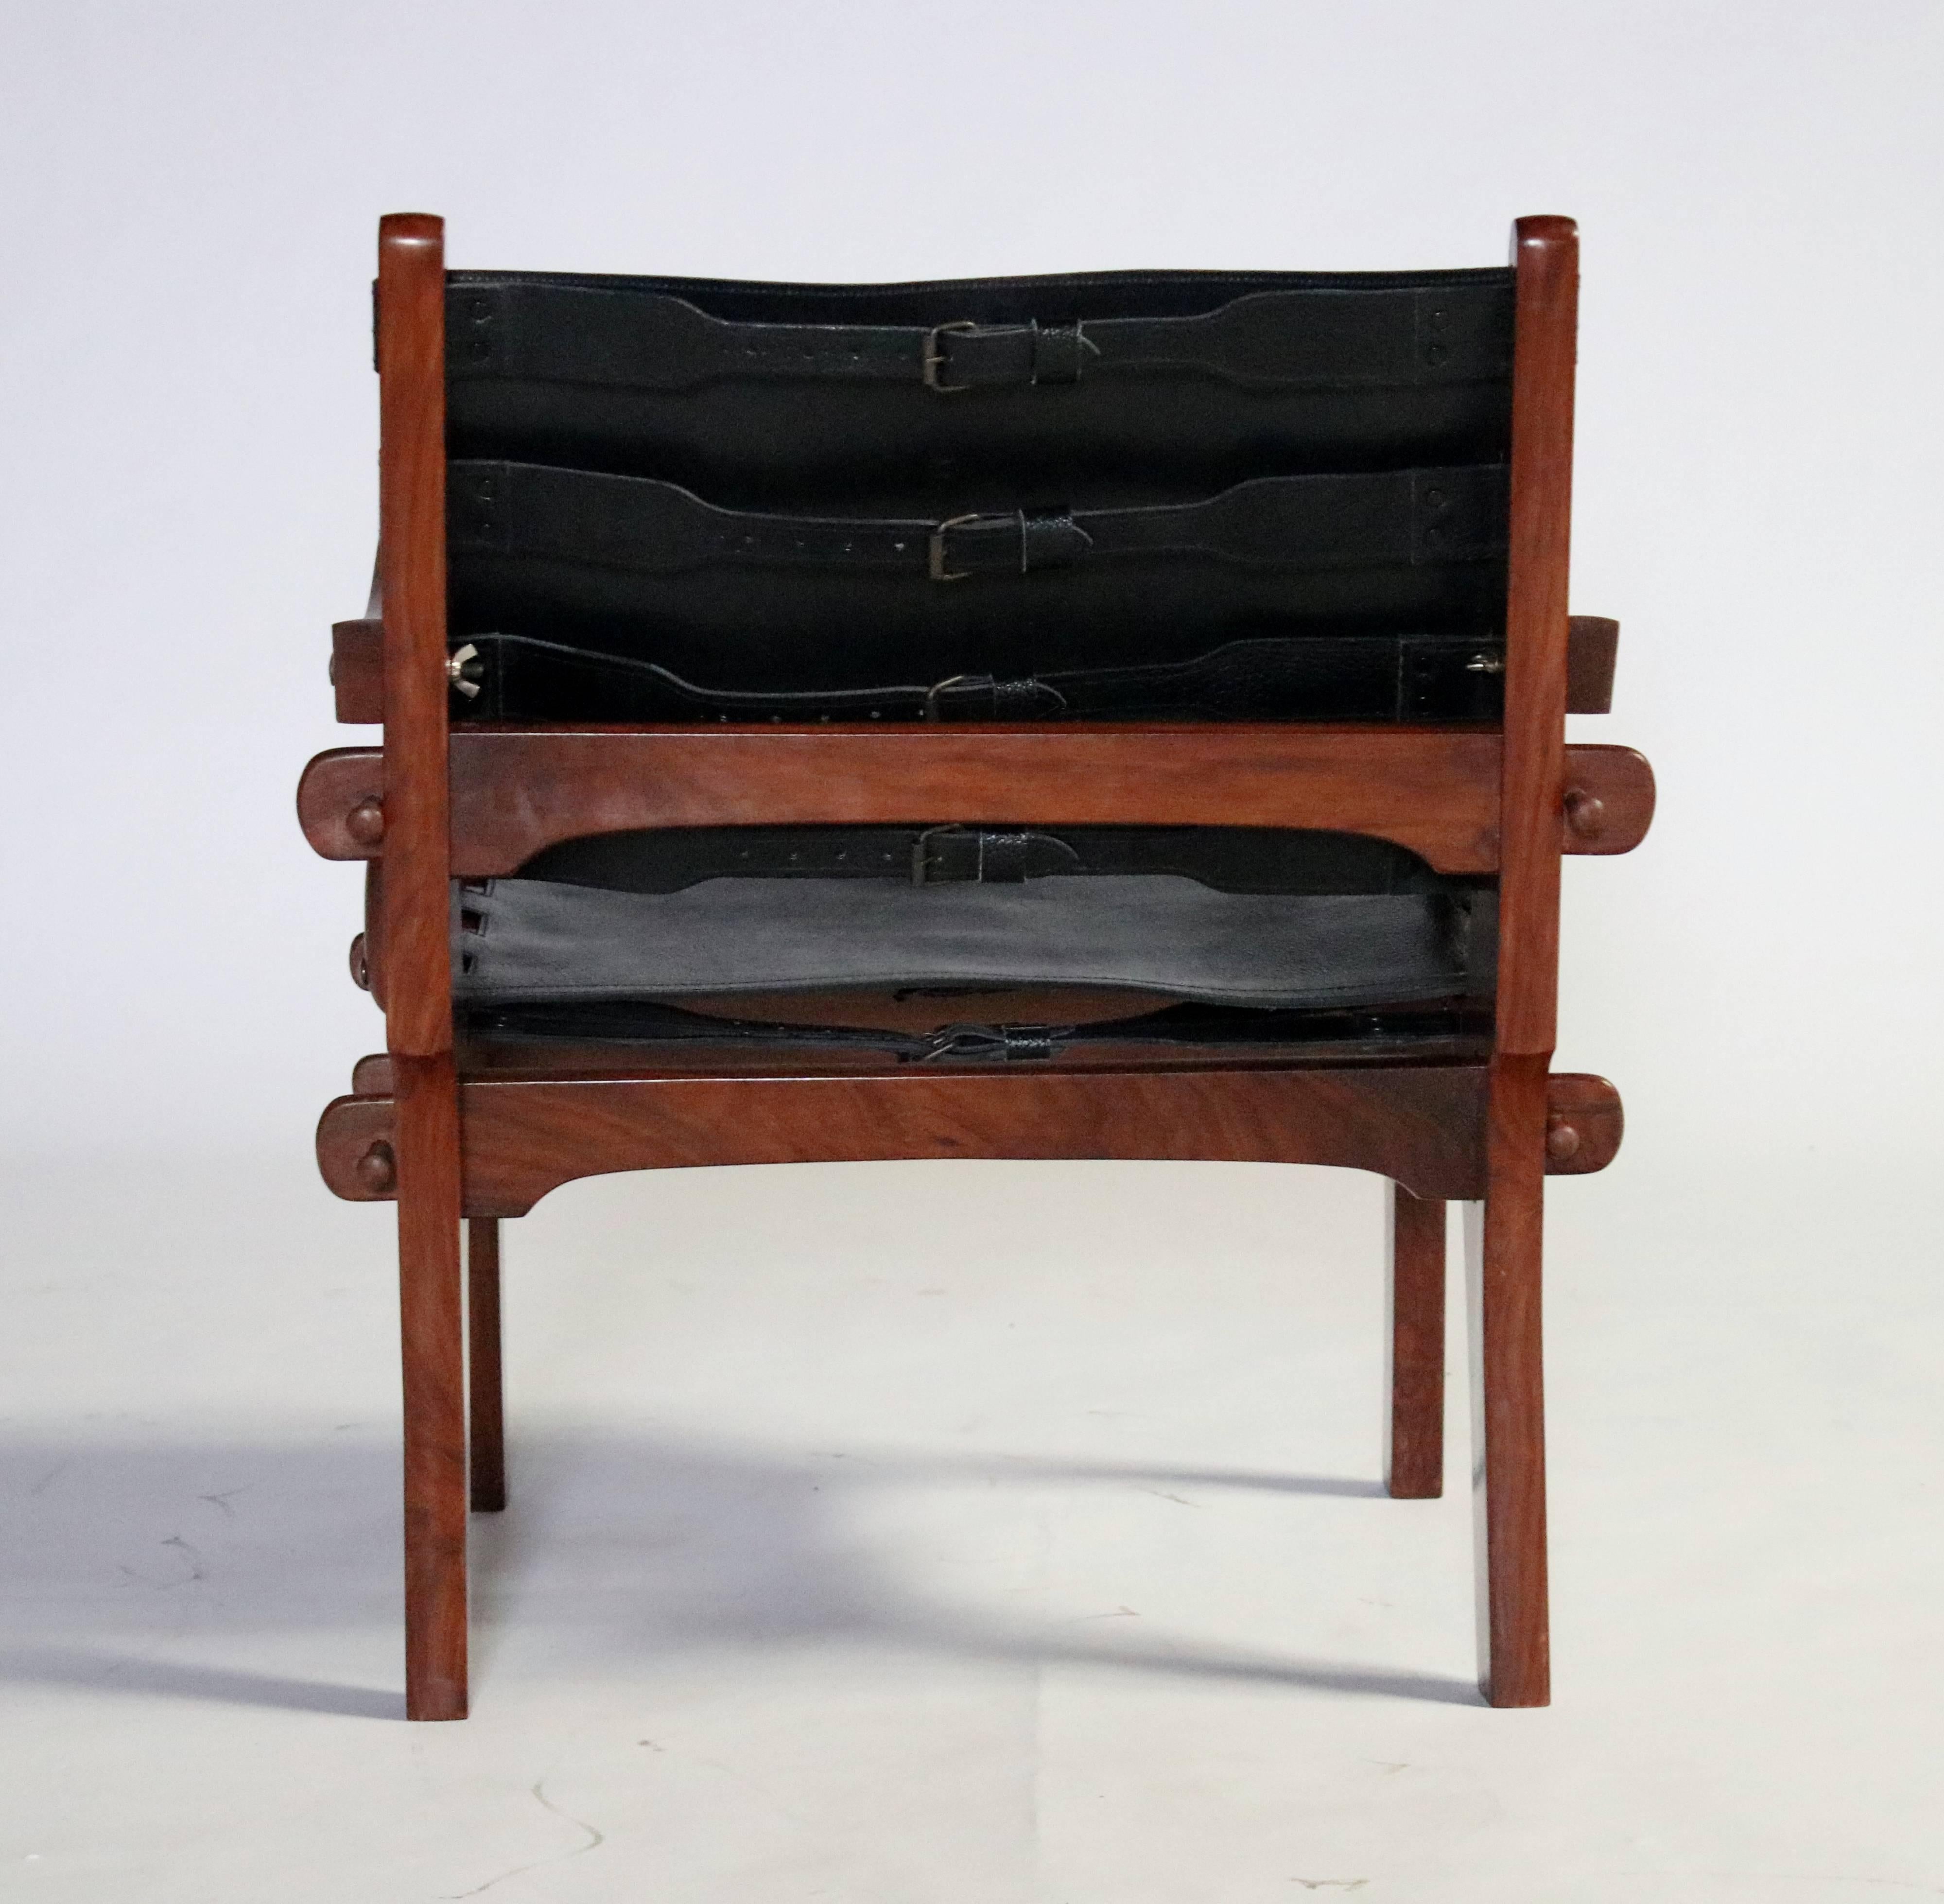 Pair of Brazilian rosewood and black leather sling armchairs with corset straps by Angel Pazmino. These chairs were purchased in Rio and have been stored for over 20 years appearing to never been used. Designed from a wooded peg construction which